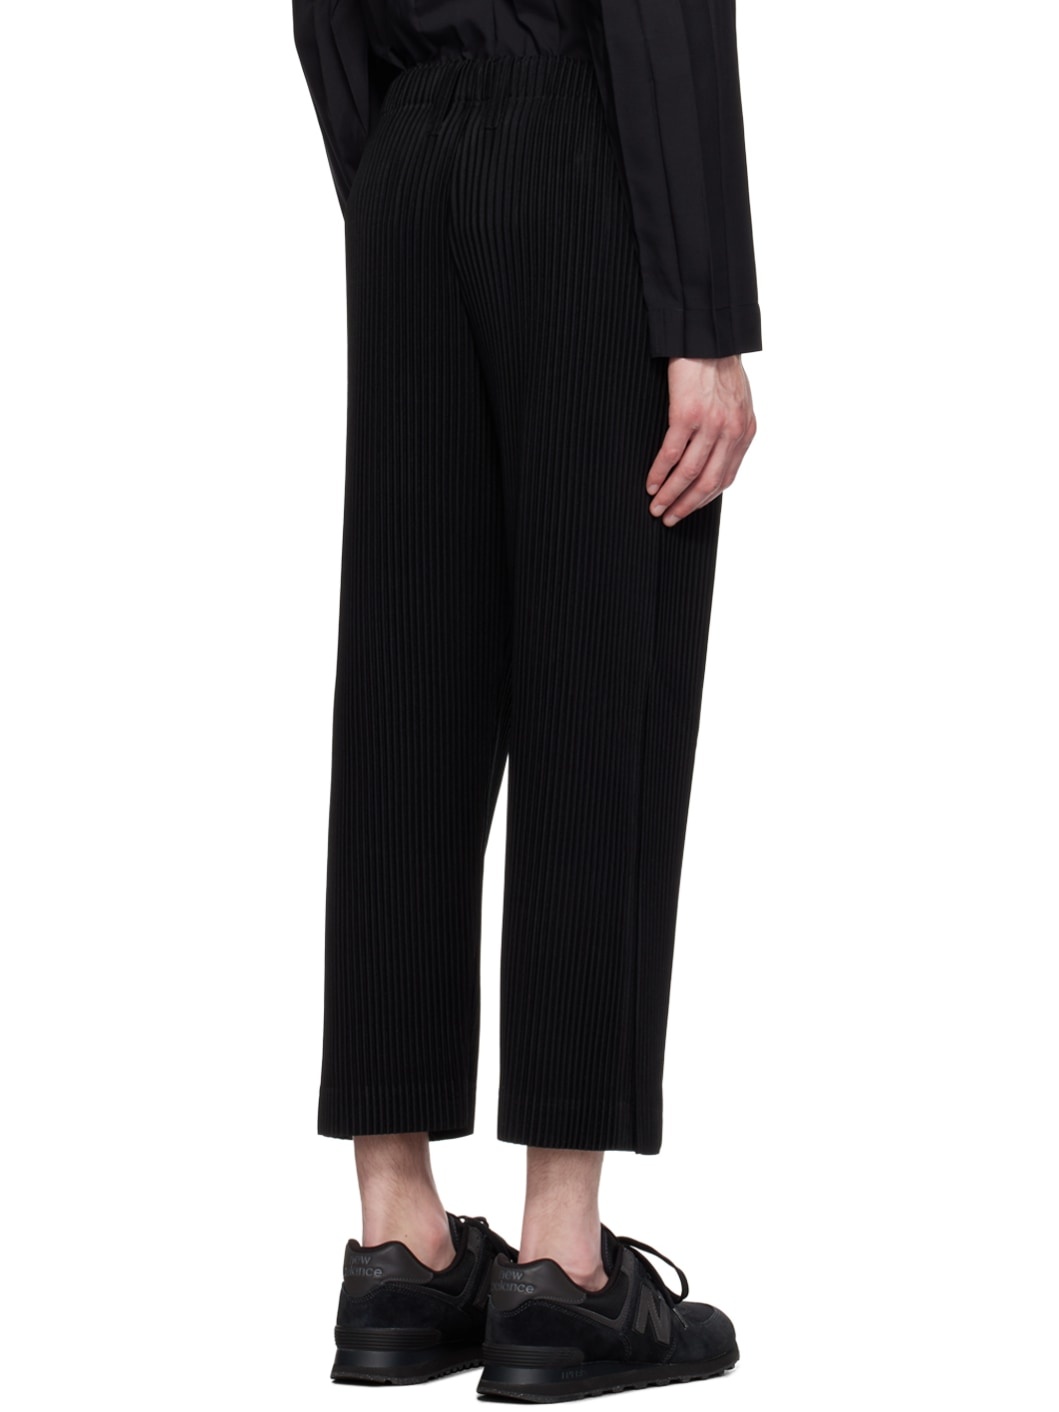 Black Tailored Pleats 1 Trousers - 3